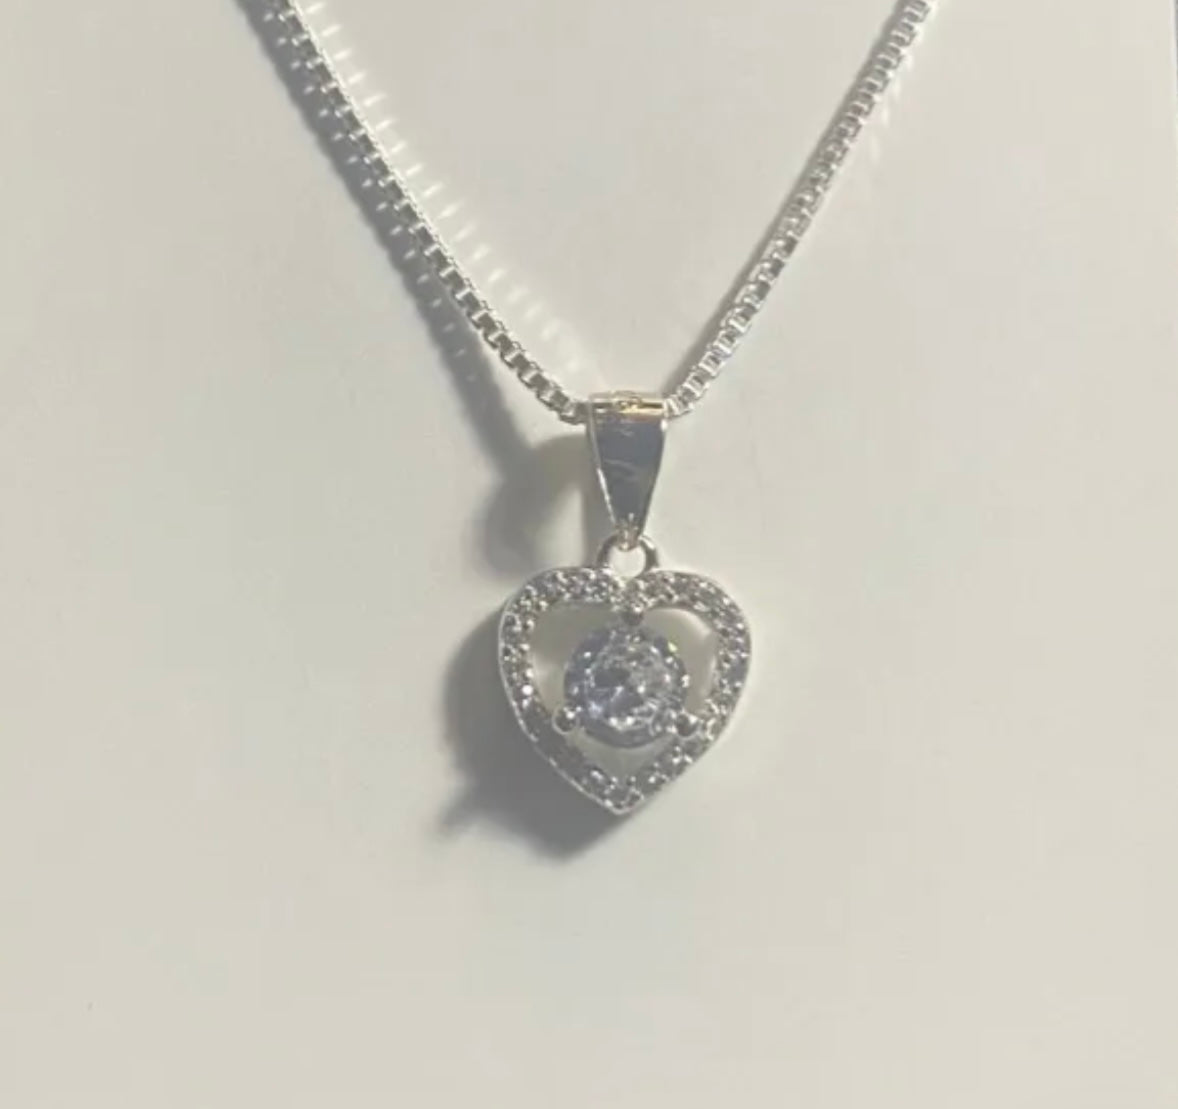 STERLING SILVER HEART NECKLACE CZ